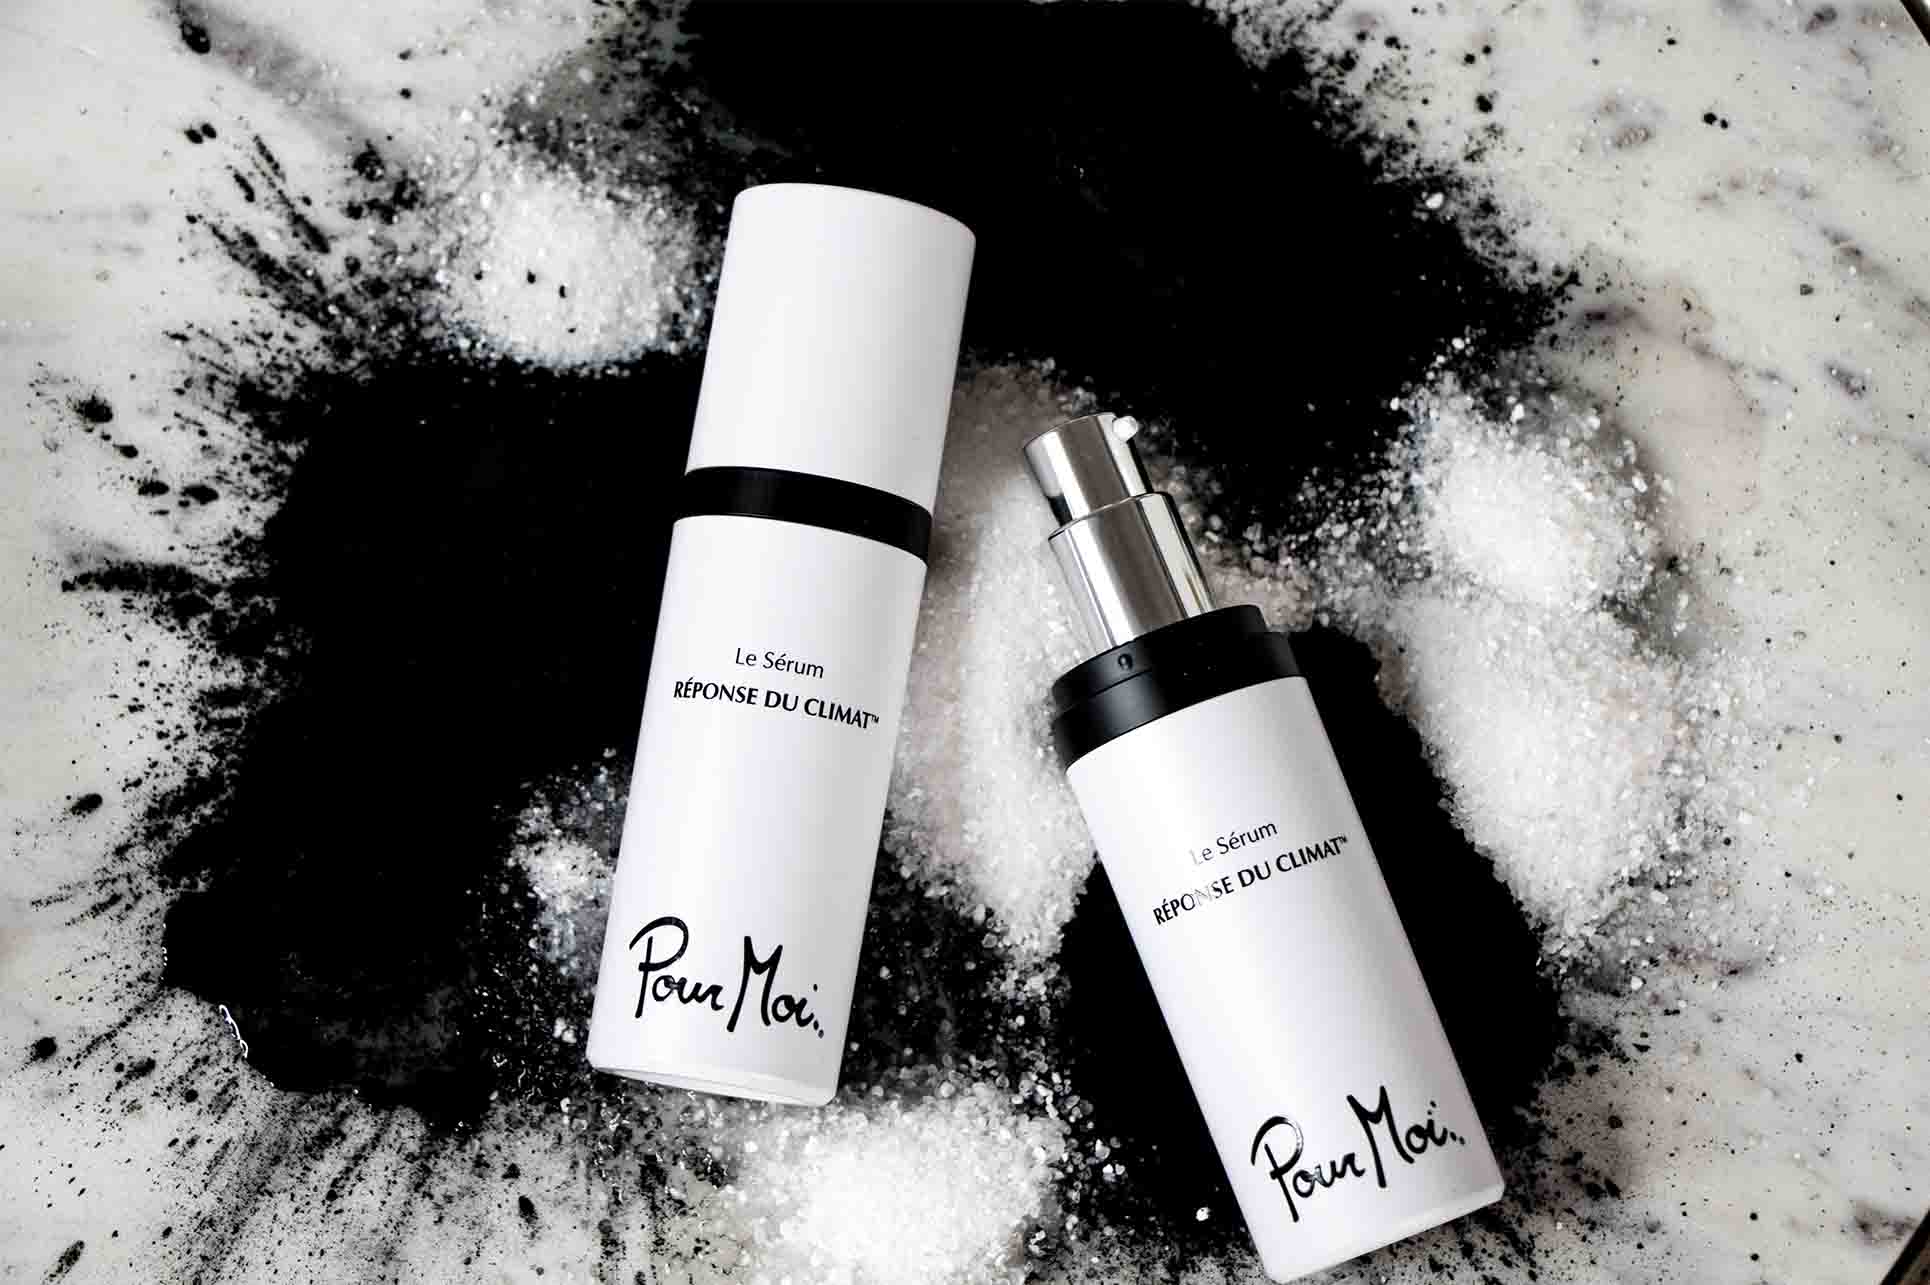 The Best Hydrating Serum Comes in Two Colors-Black-White